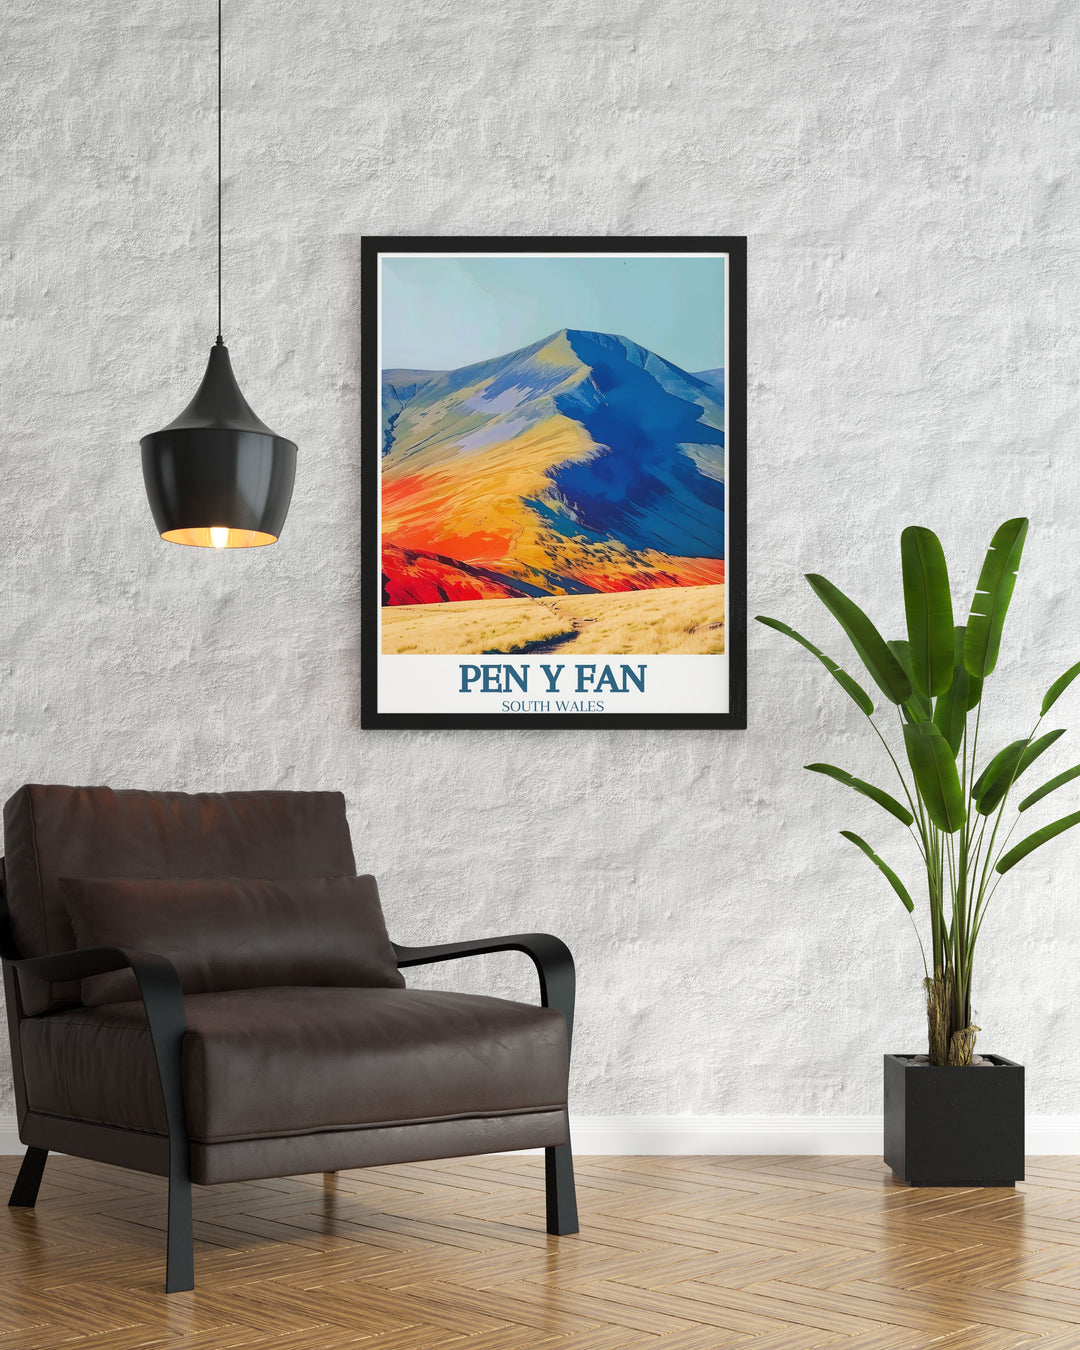 High quality Brecon Beacons artwork highlighting the serene landscapes of Powys in South Wales. This Pen Y Fan Poster is a must have for anyone who loves hiking and wants a visual reminder of their adventures in the Welsh mountains.